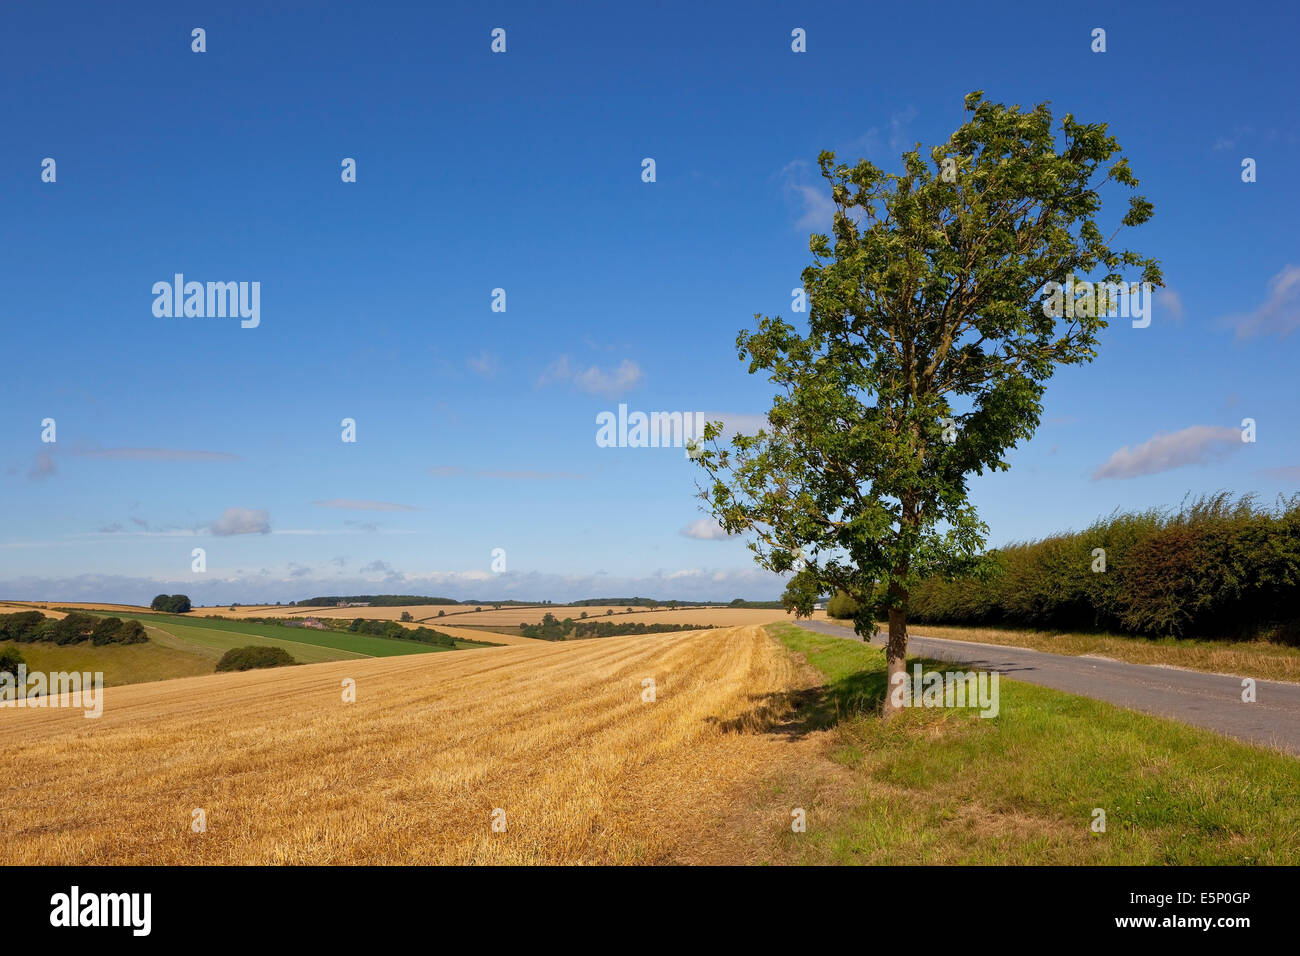 A young Ash tree grows on the grass verge between a country road with hawthorn hedgerow and golden stubble fields in summertime Stock Photo